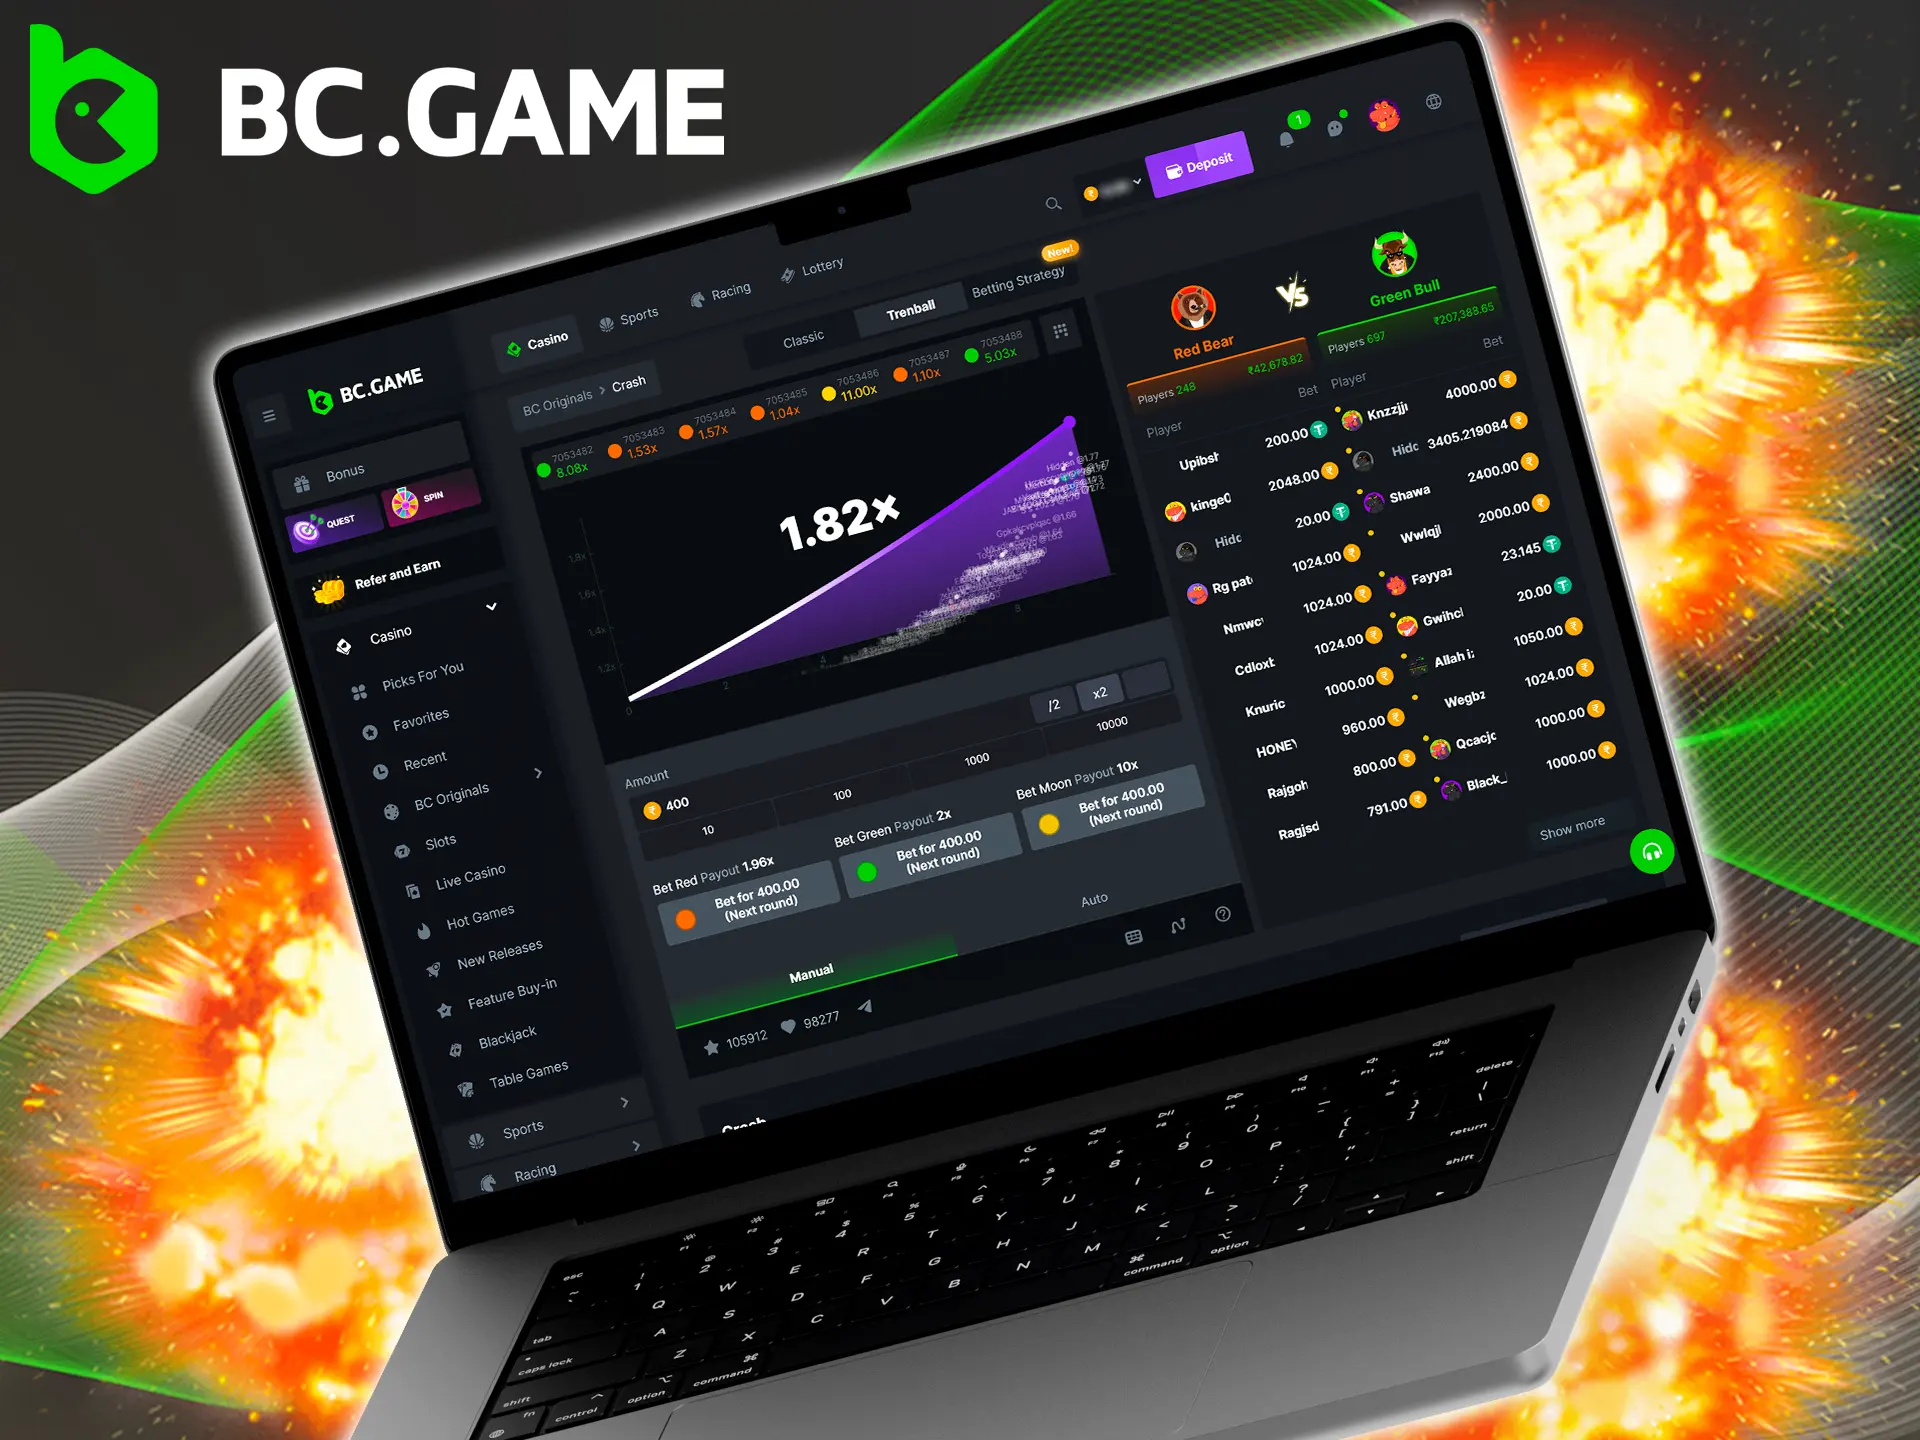 Join BC Game to enjoy the Crash game and have fun.